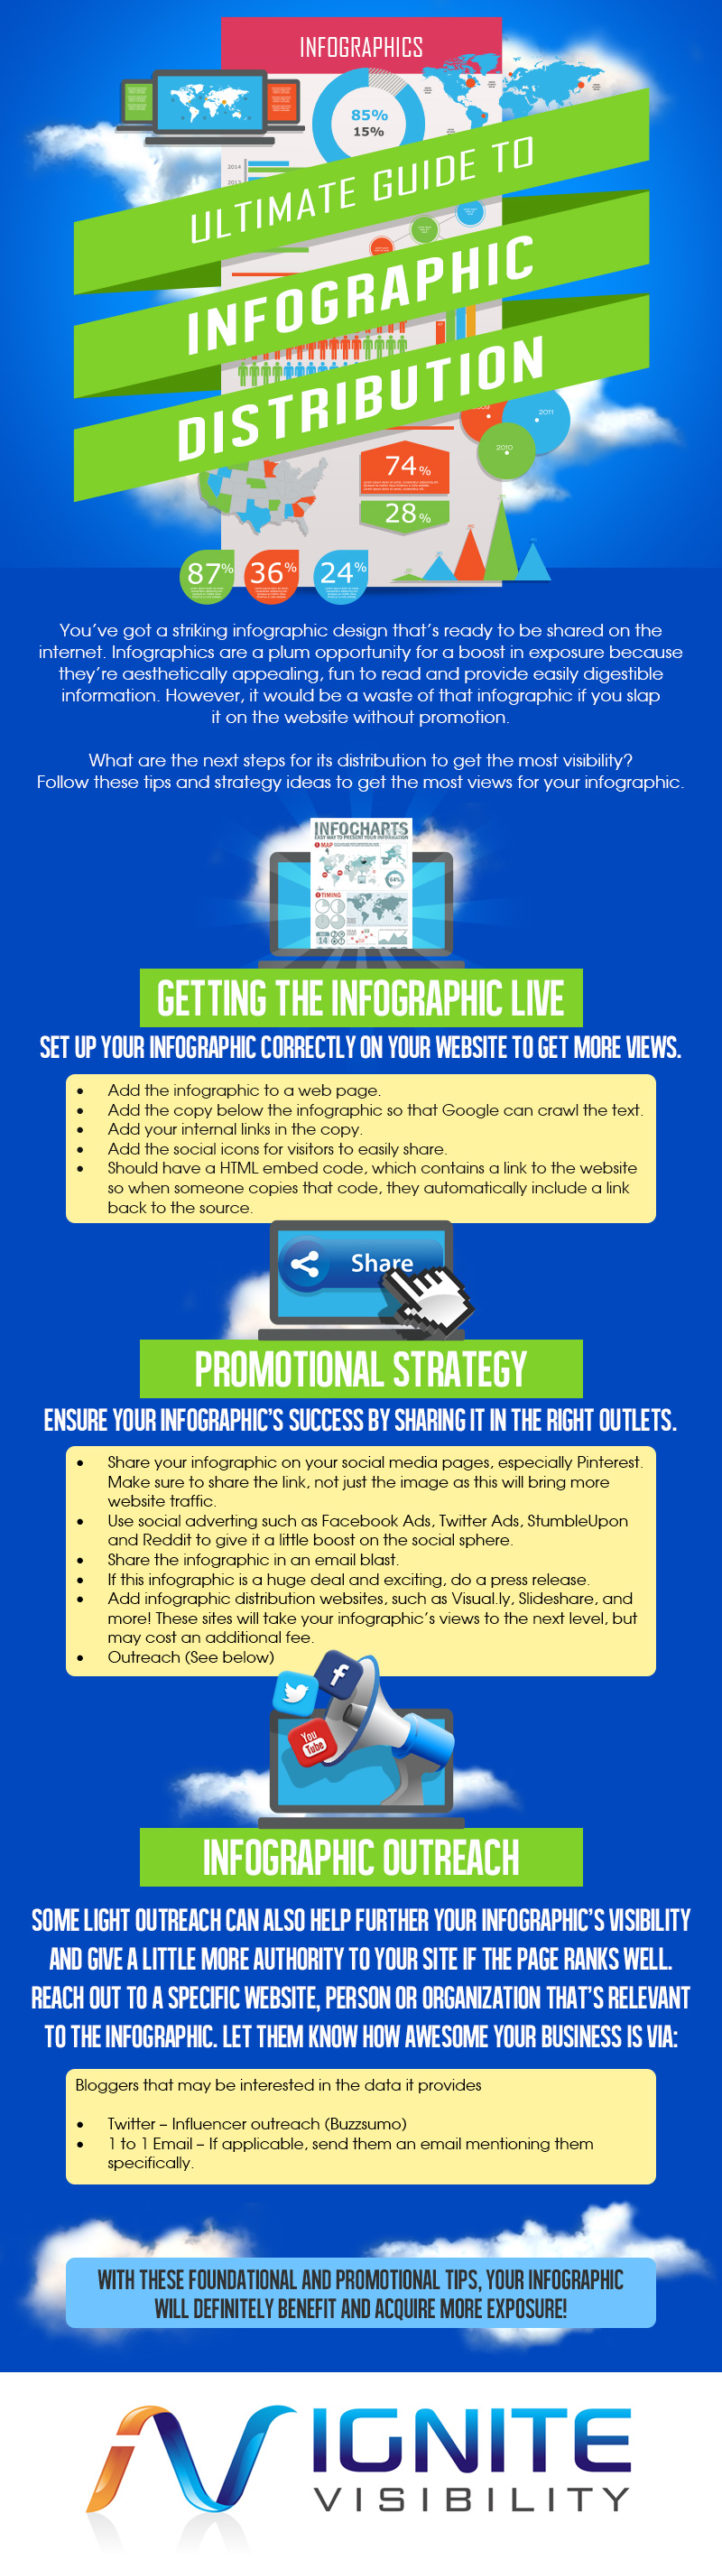 ultimate-guide-to-infographic-distribution-B